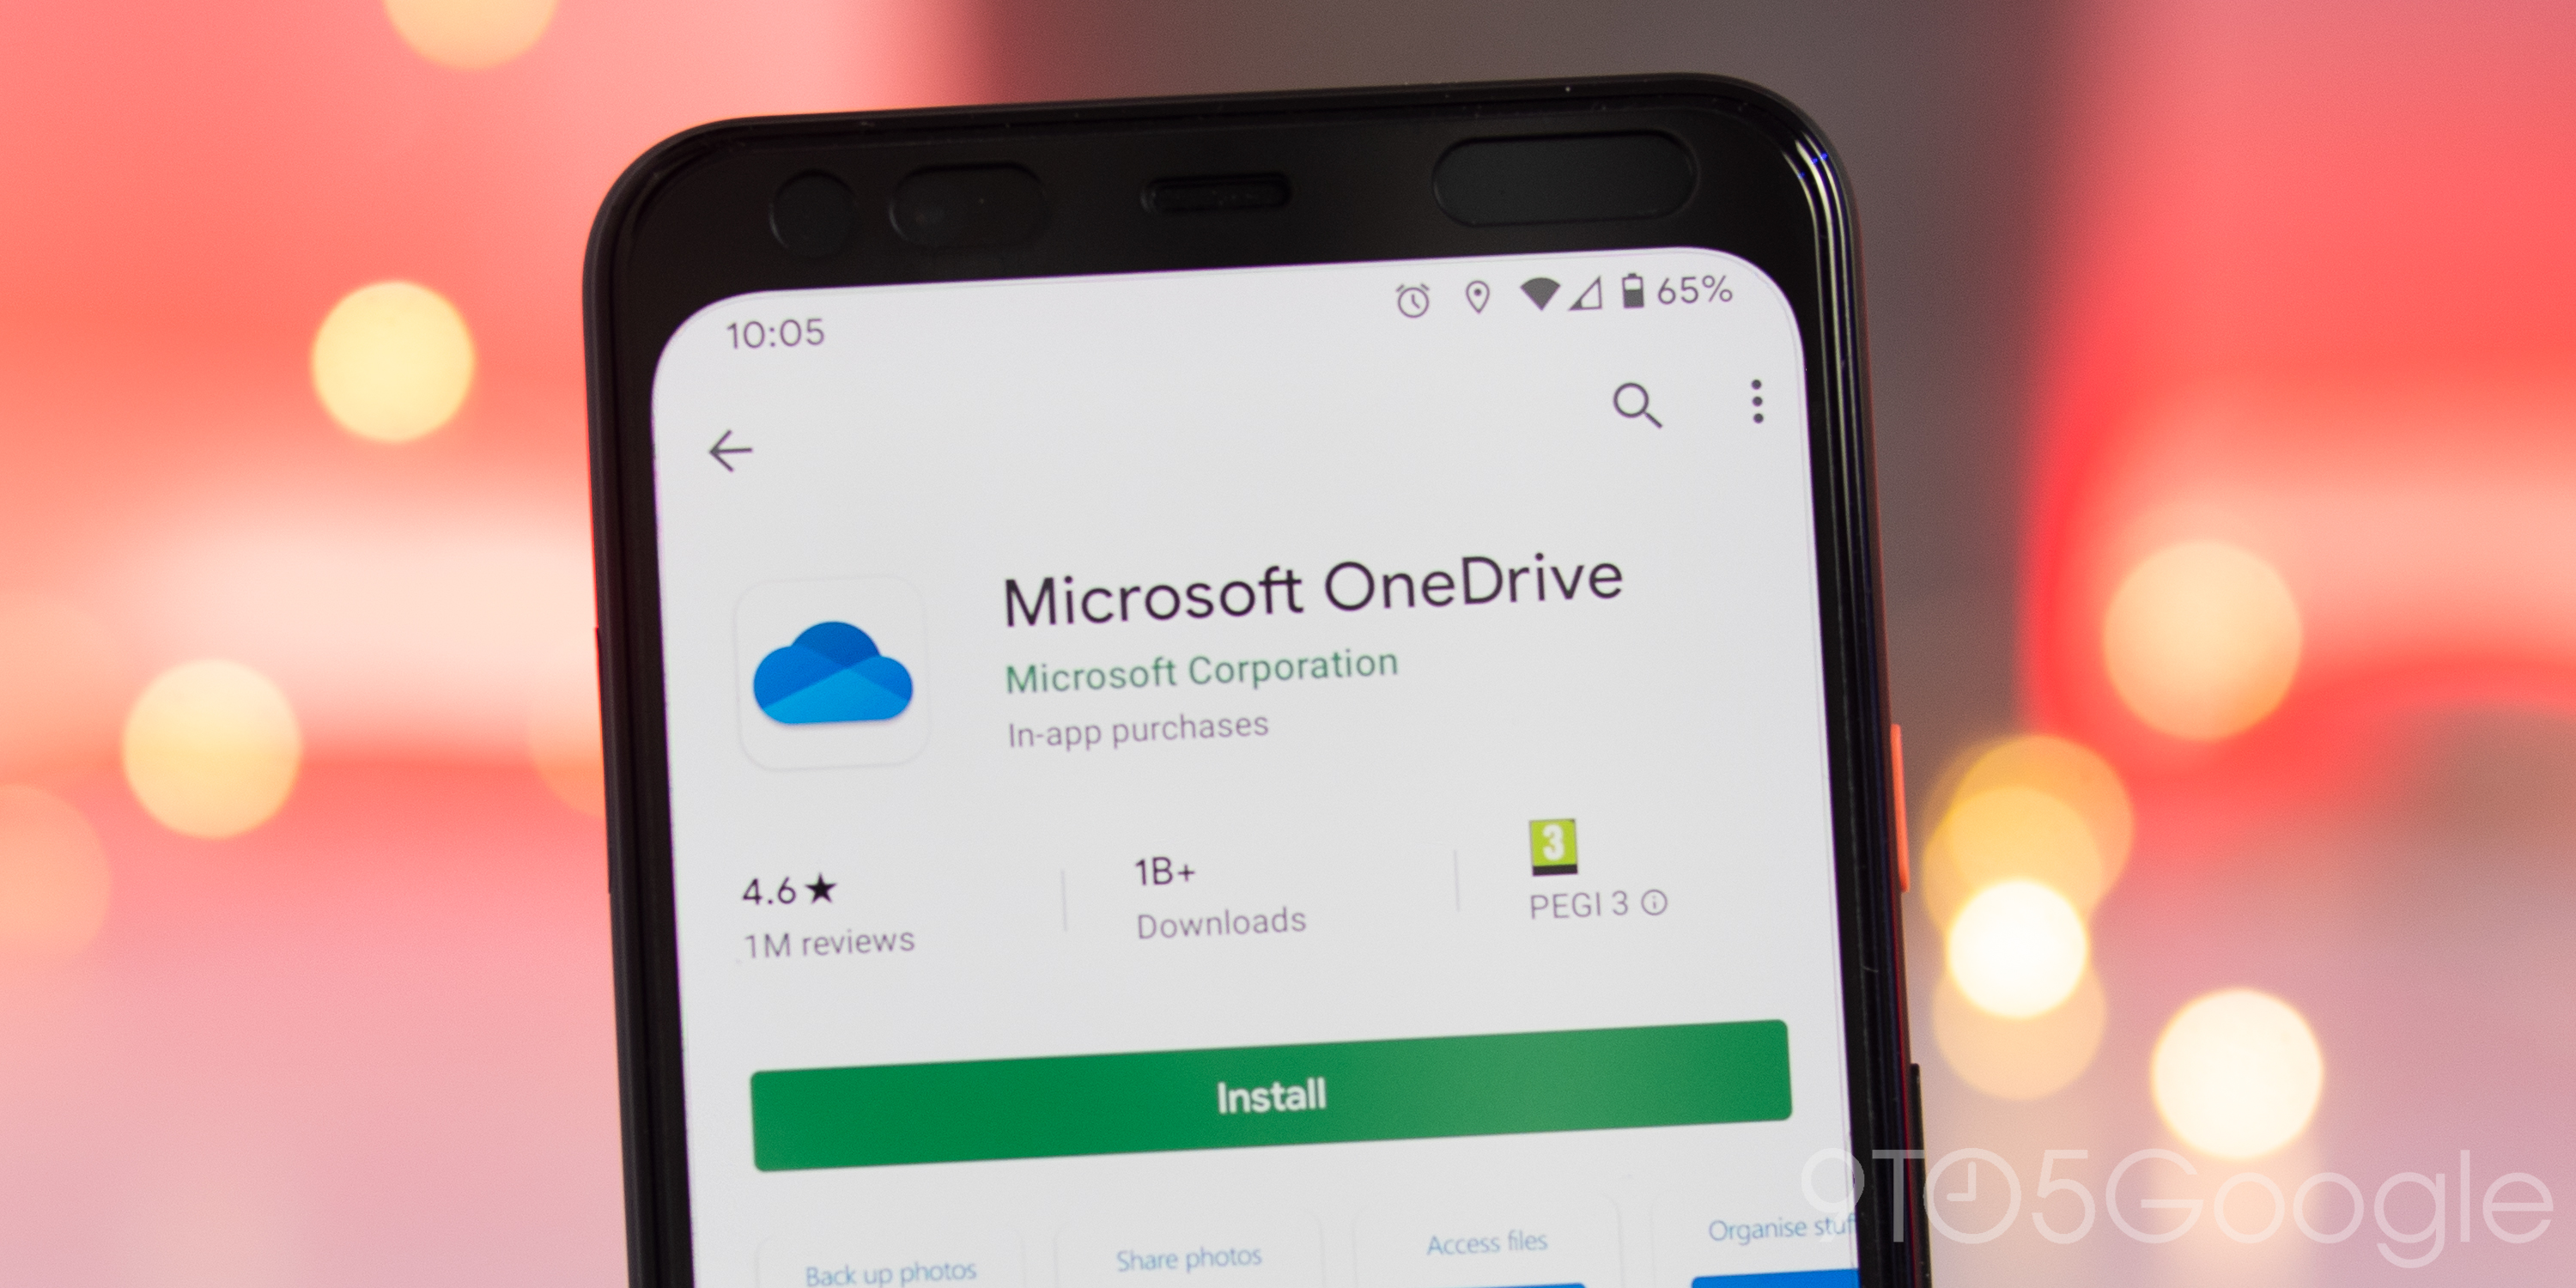 download pictures from onedrive to android